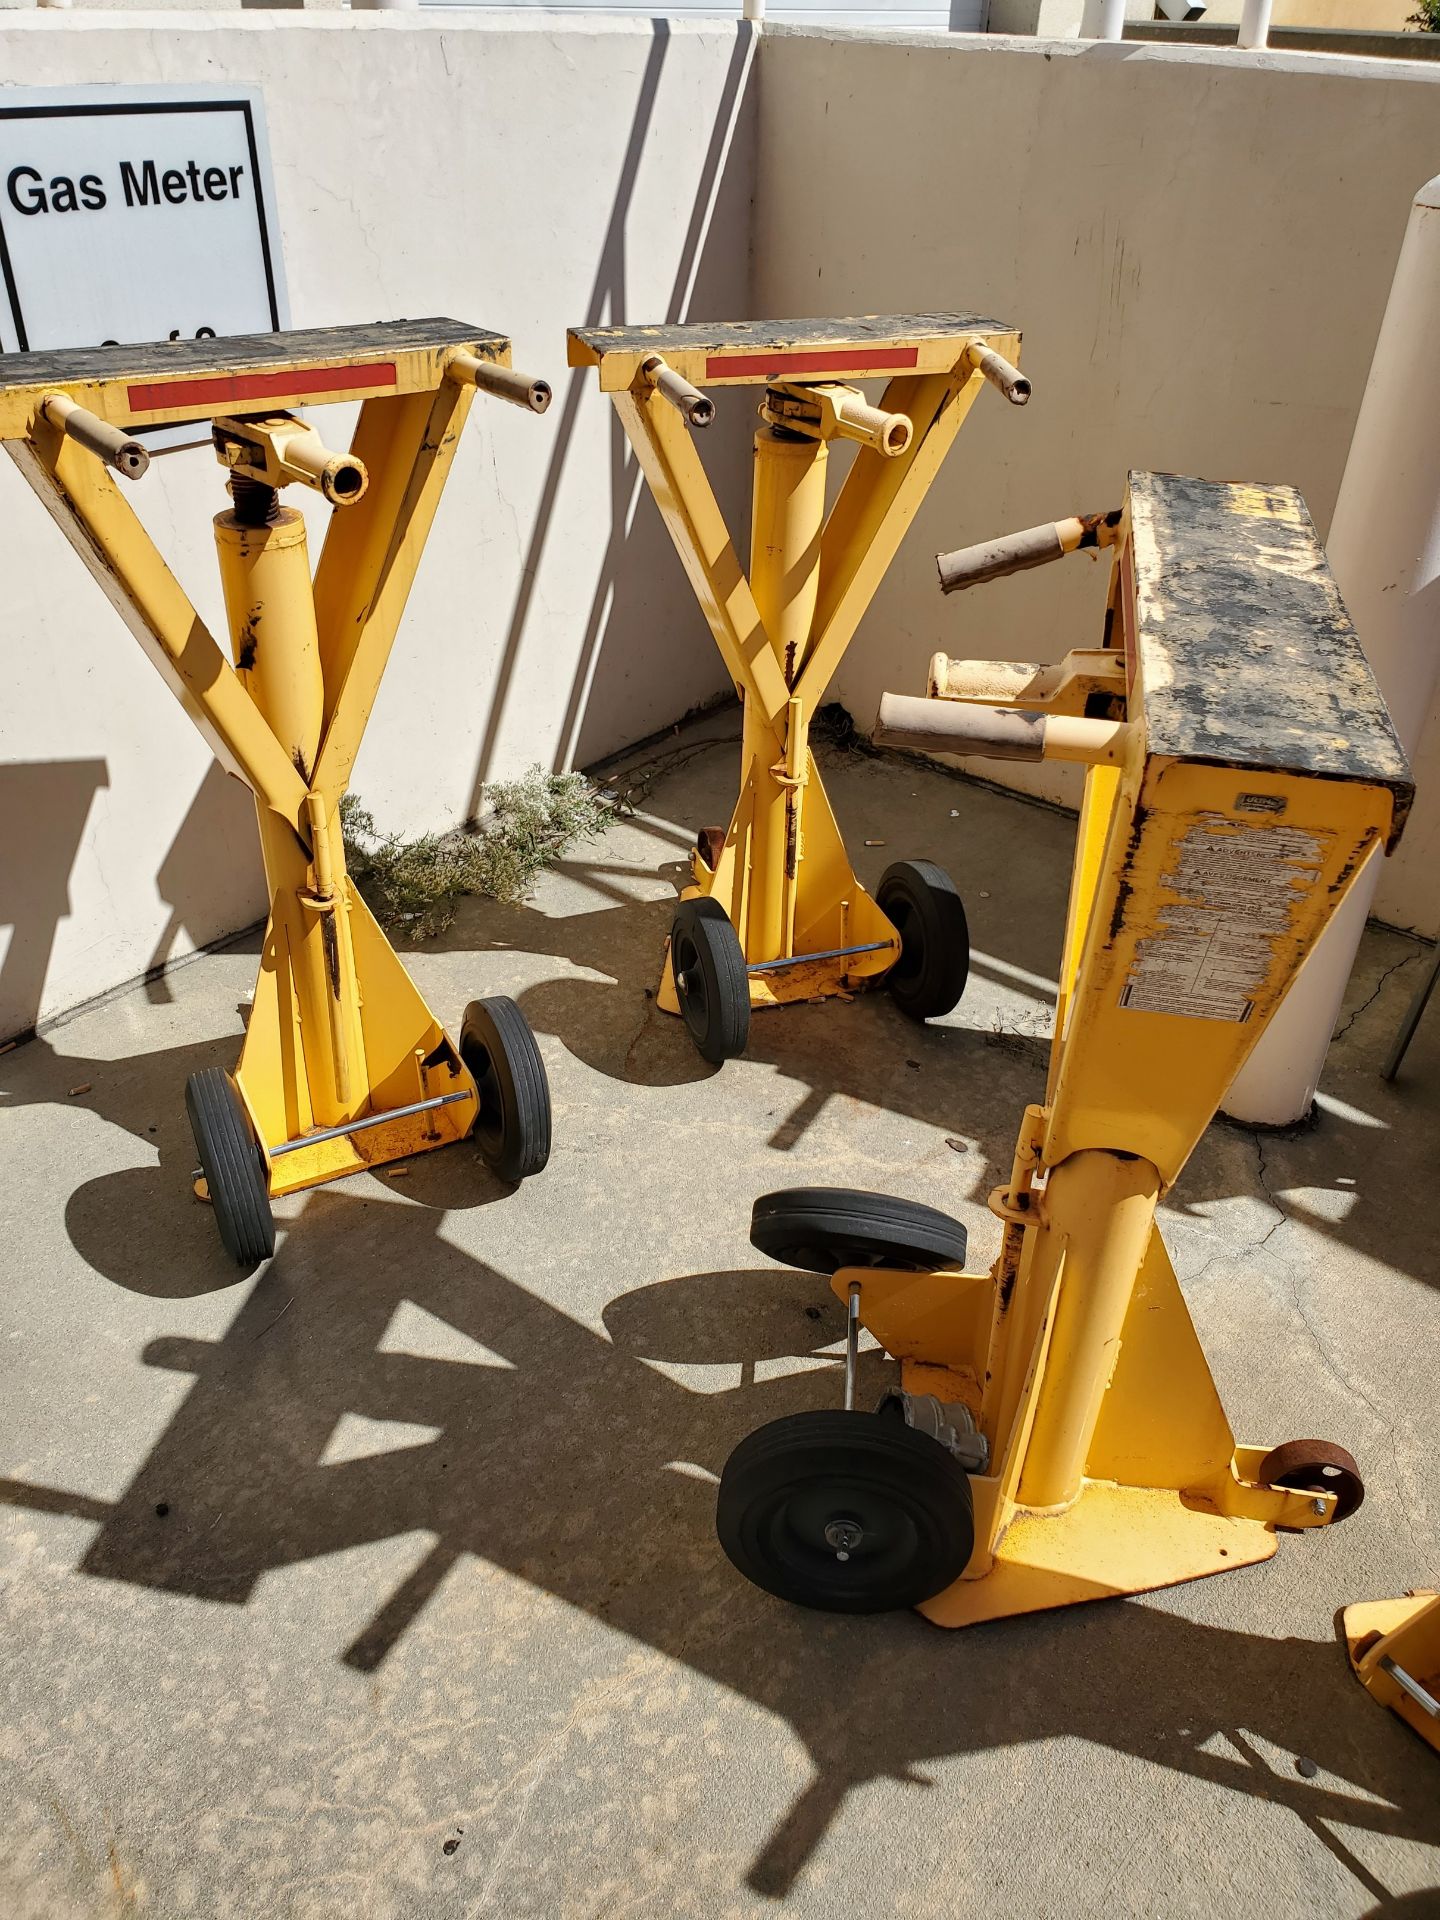 (8) ULINE TRAILER STABILIZING JACK STANDS, 100,000 LB STATIC CAPACITY, 50,000 LB LIFTING CAPACITY - Image 3 of 5